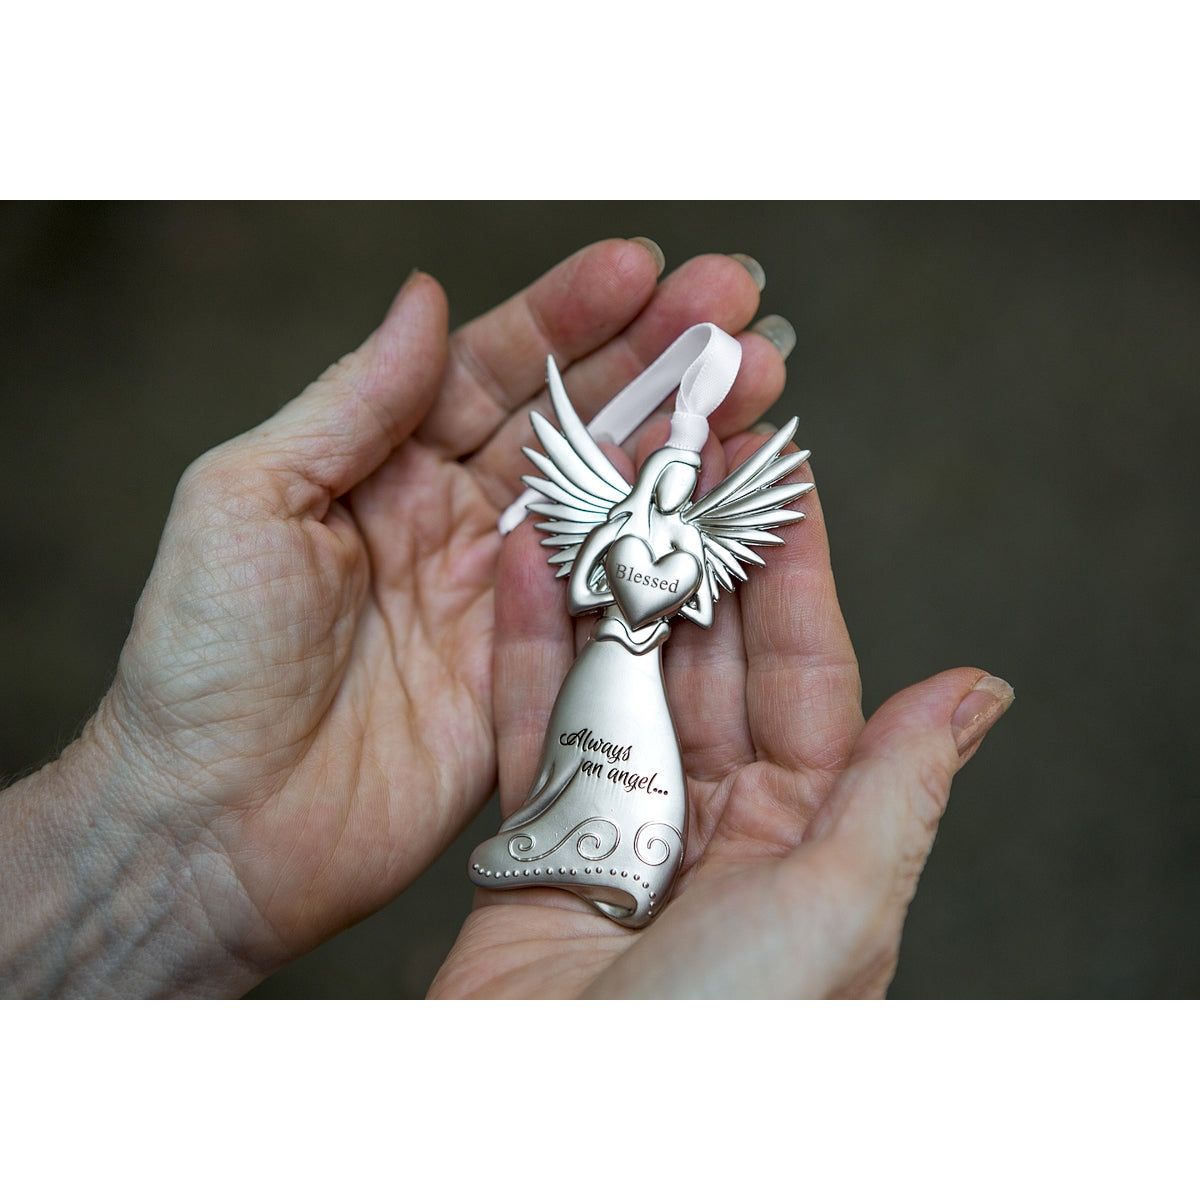 Blessed angel being held in the palm of a hand.